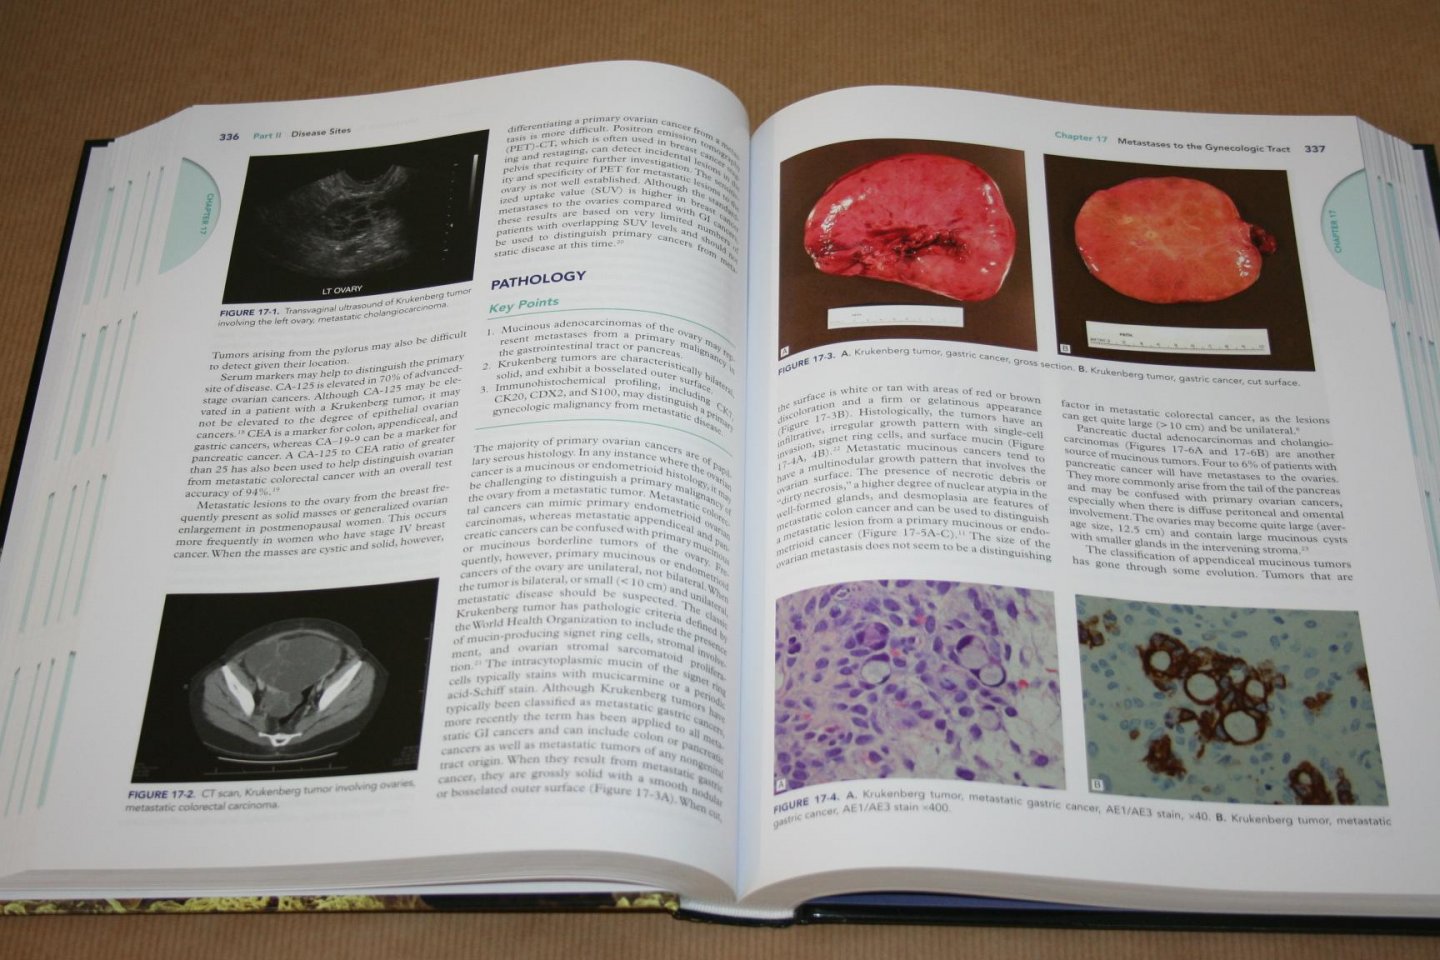 Karlan, Bristow & Li - Gynecologic Oncology -- Clinical Practice & Surgical Atlas